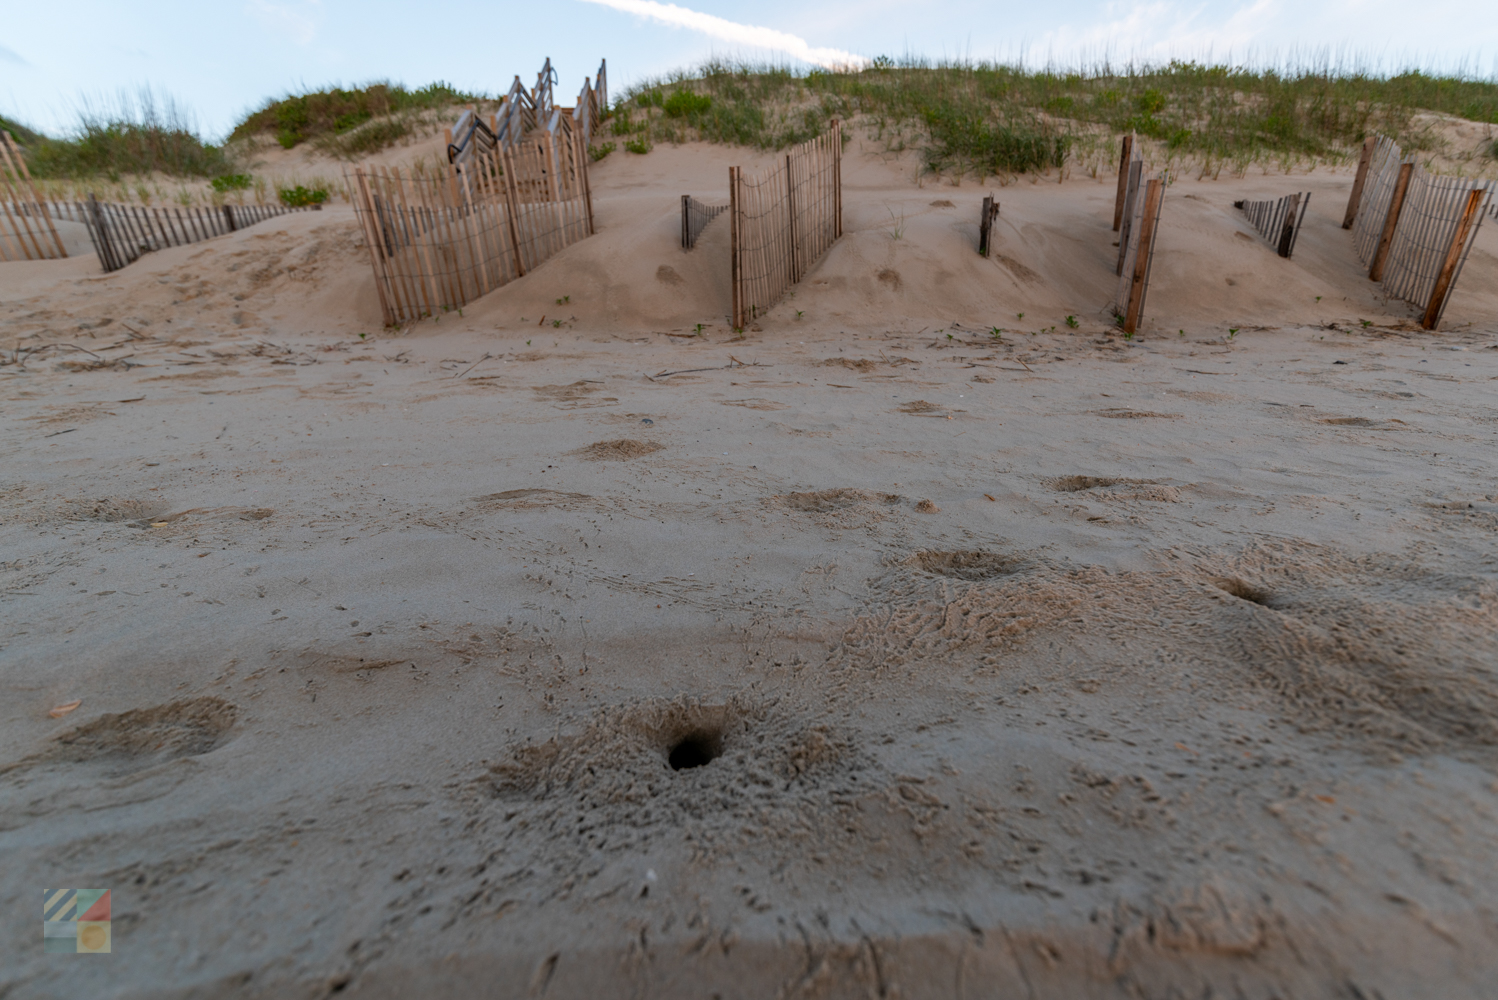 Ghost Crabs holes on the beach